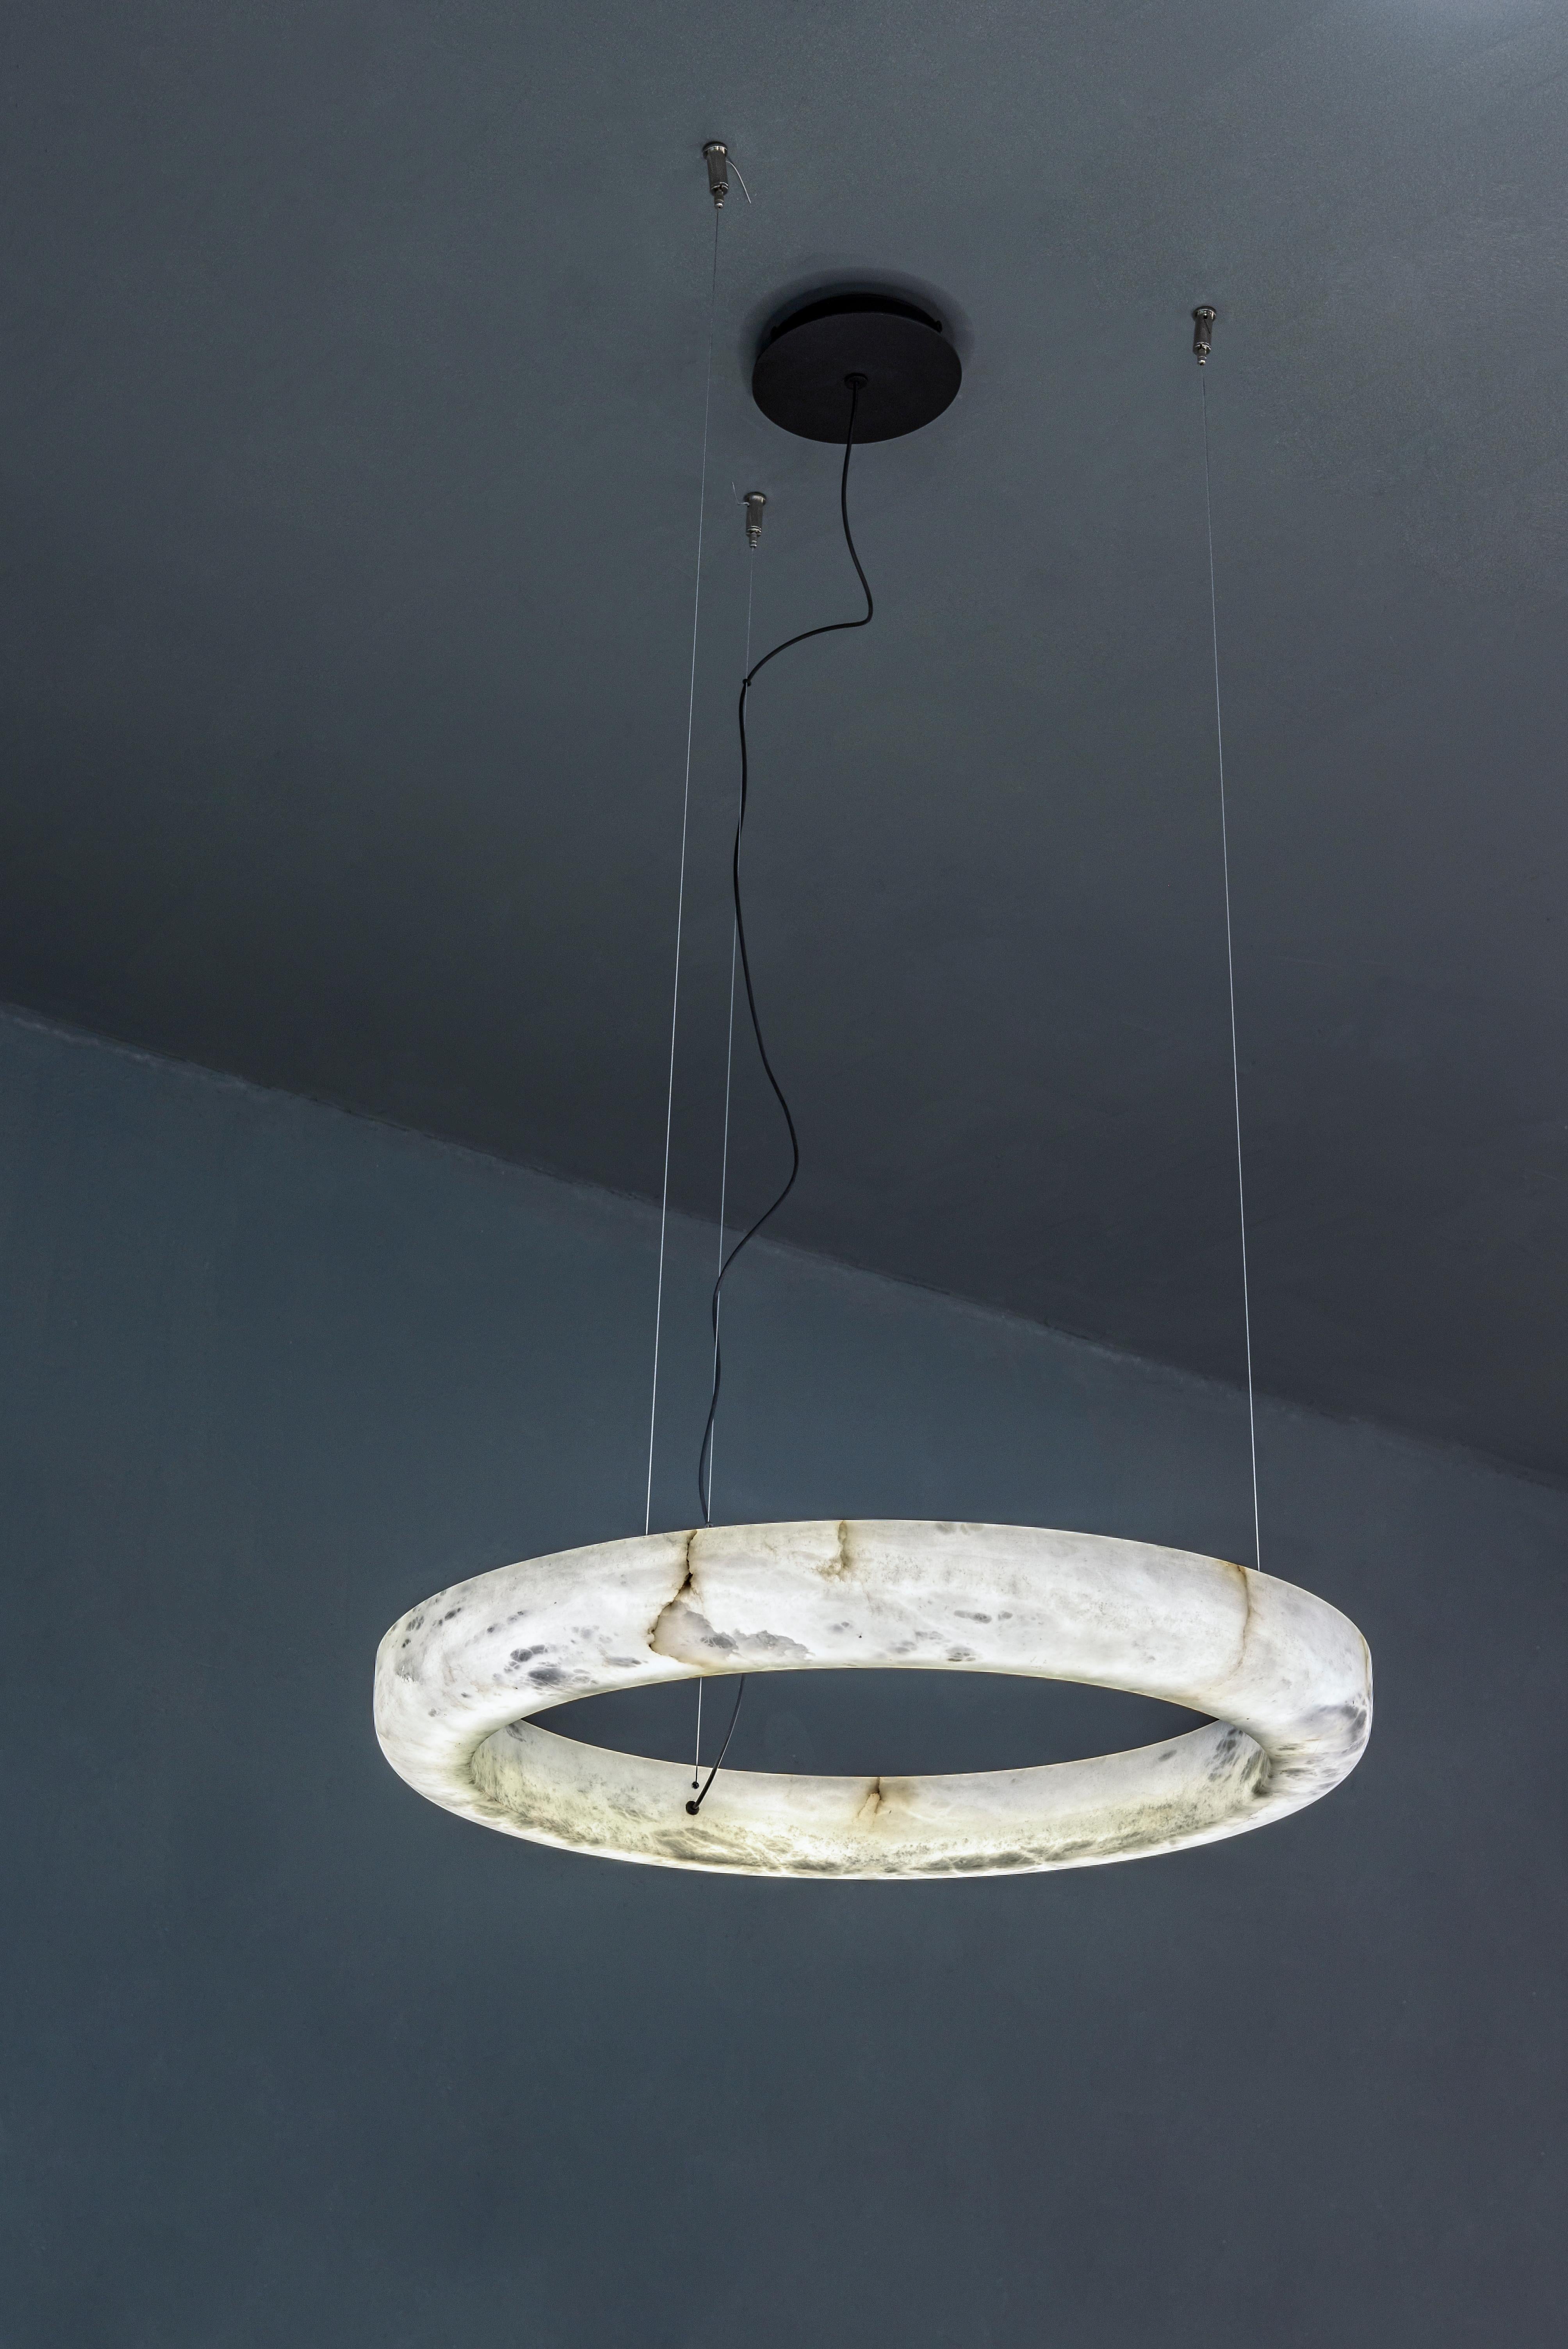 Ring 64 Pendant Lamp by United Alabaster
Dimensions: D 64 x H 200 cm
Materials: Alabaster

All our lamps can be wired according to each country. If sold to the USA it will be wired for the USA for instance.

A suspended alabaster ring with a